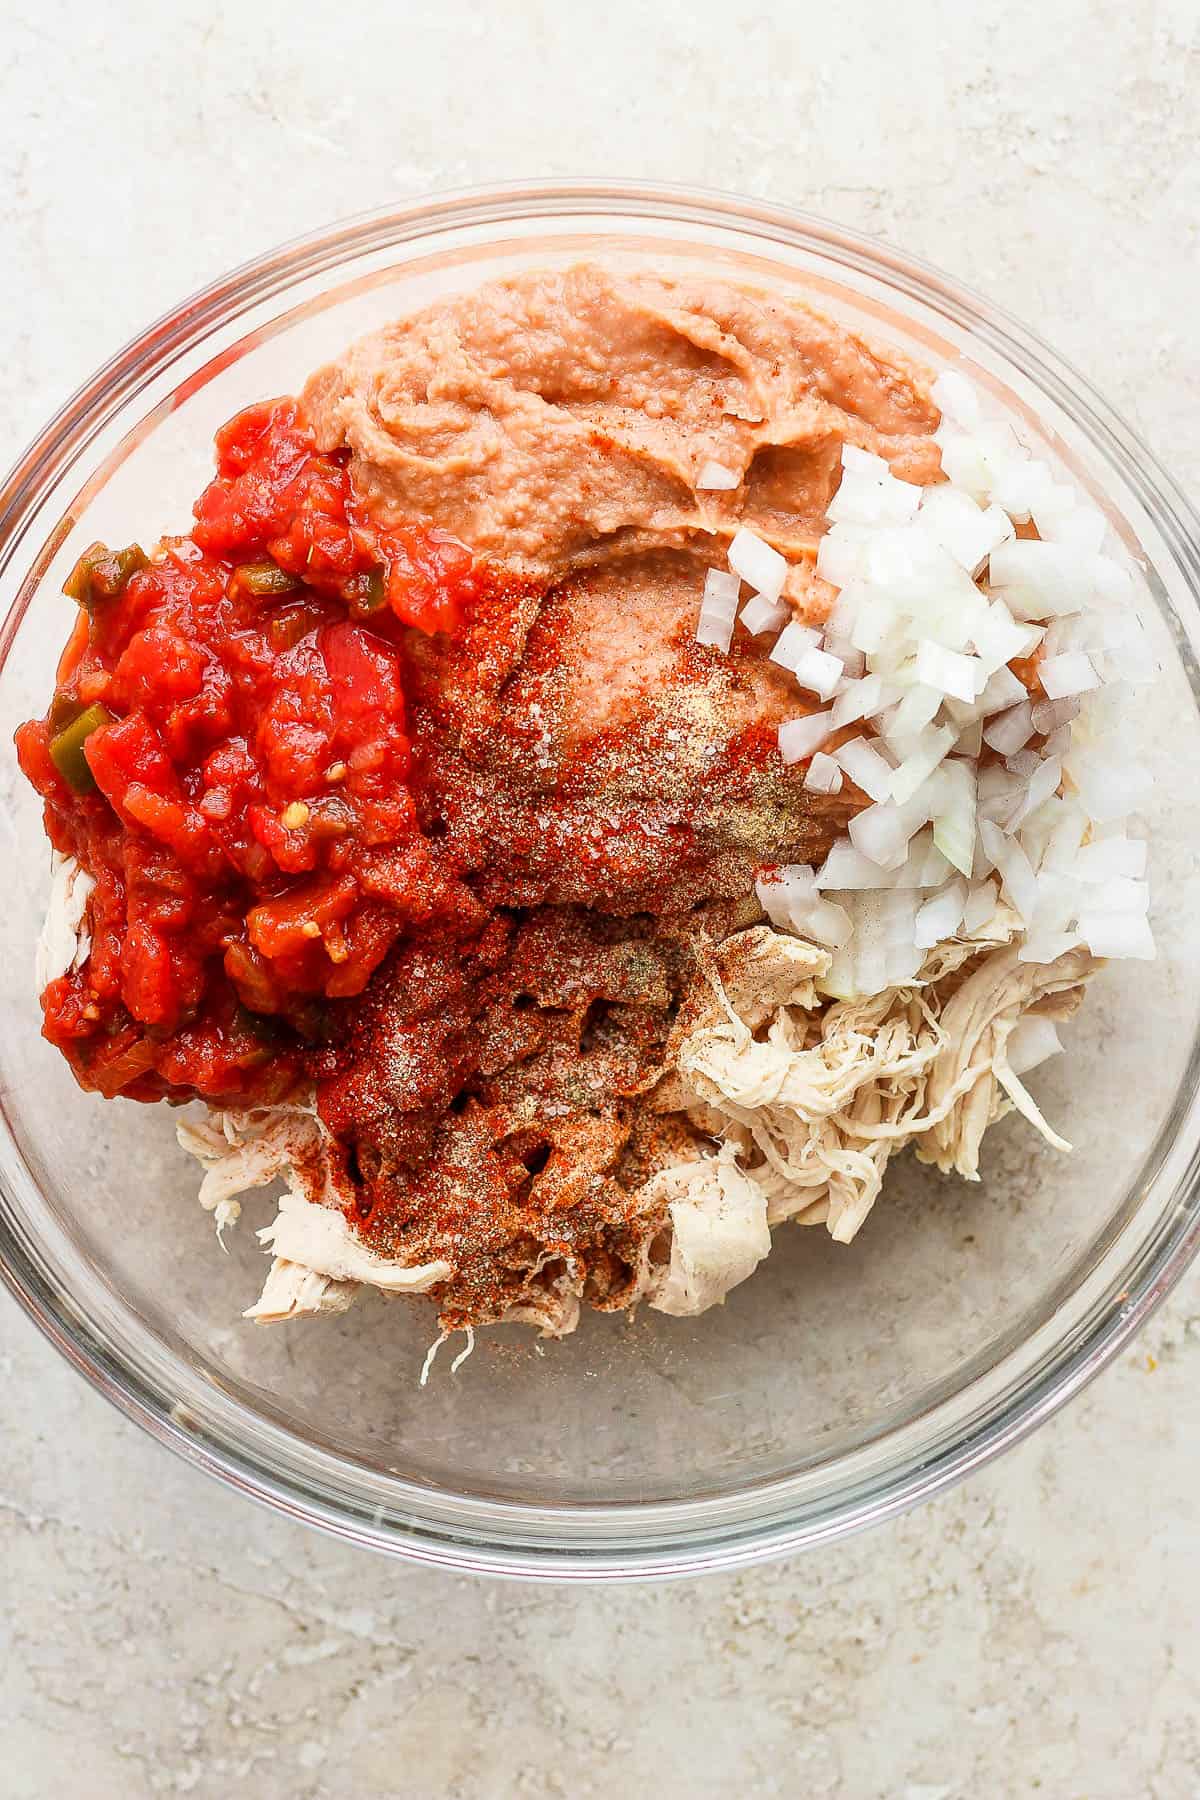 Shredded chicken, refried beans, diced onions, salsa, and seasonings in a large mixing bowl.